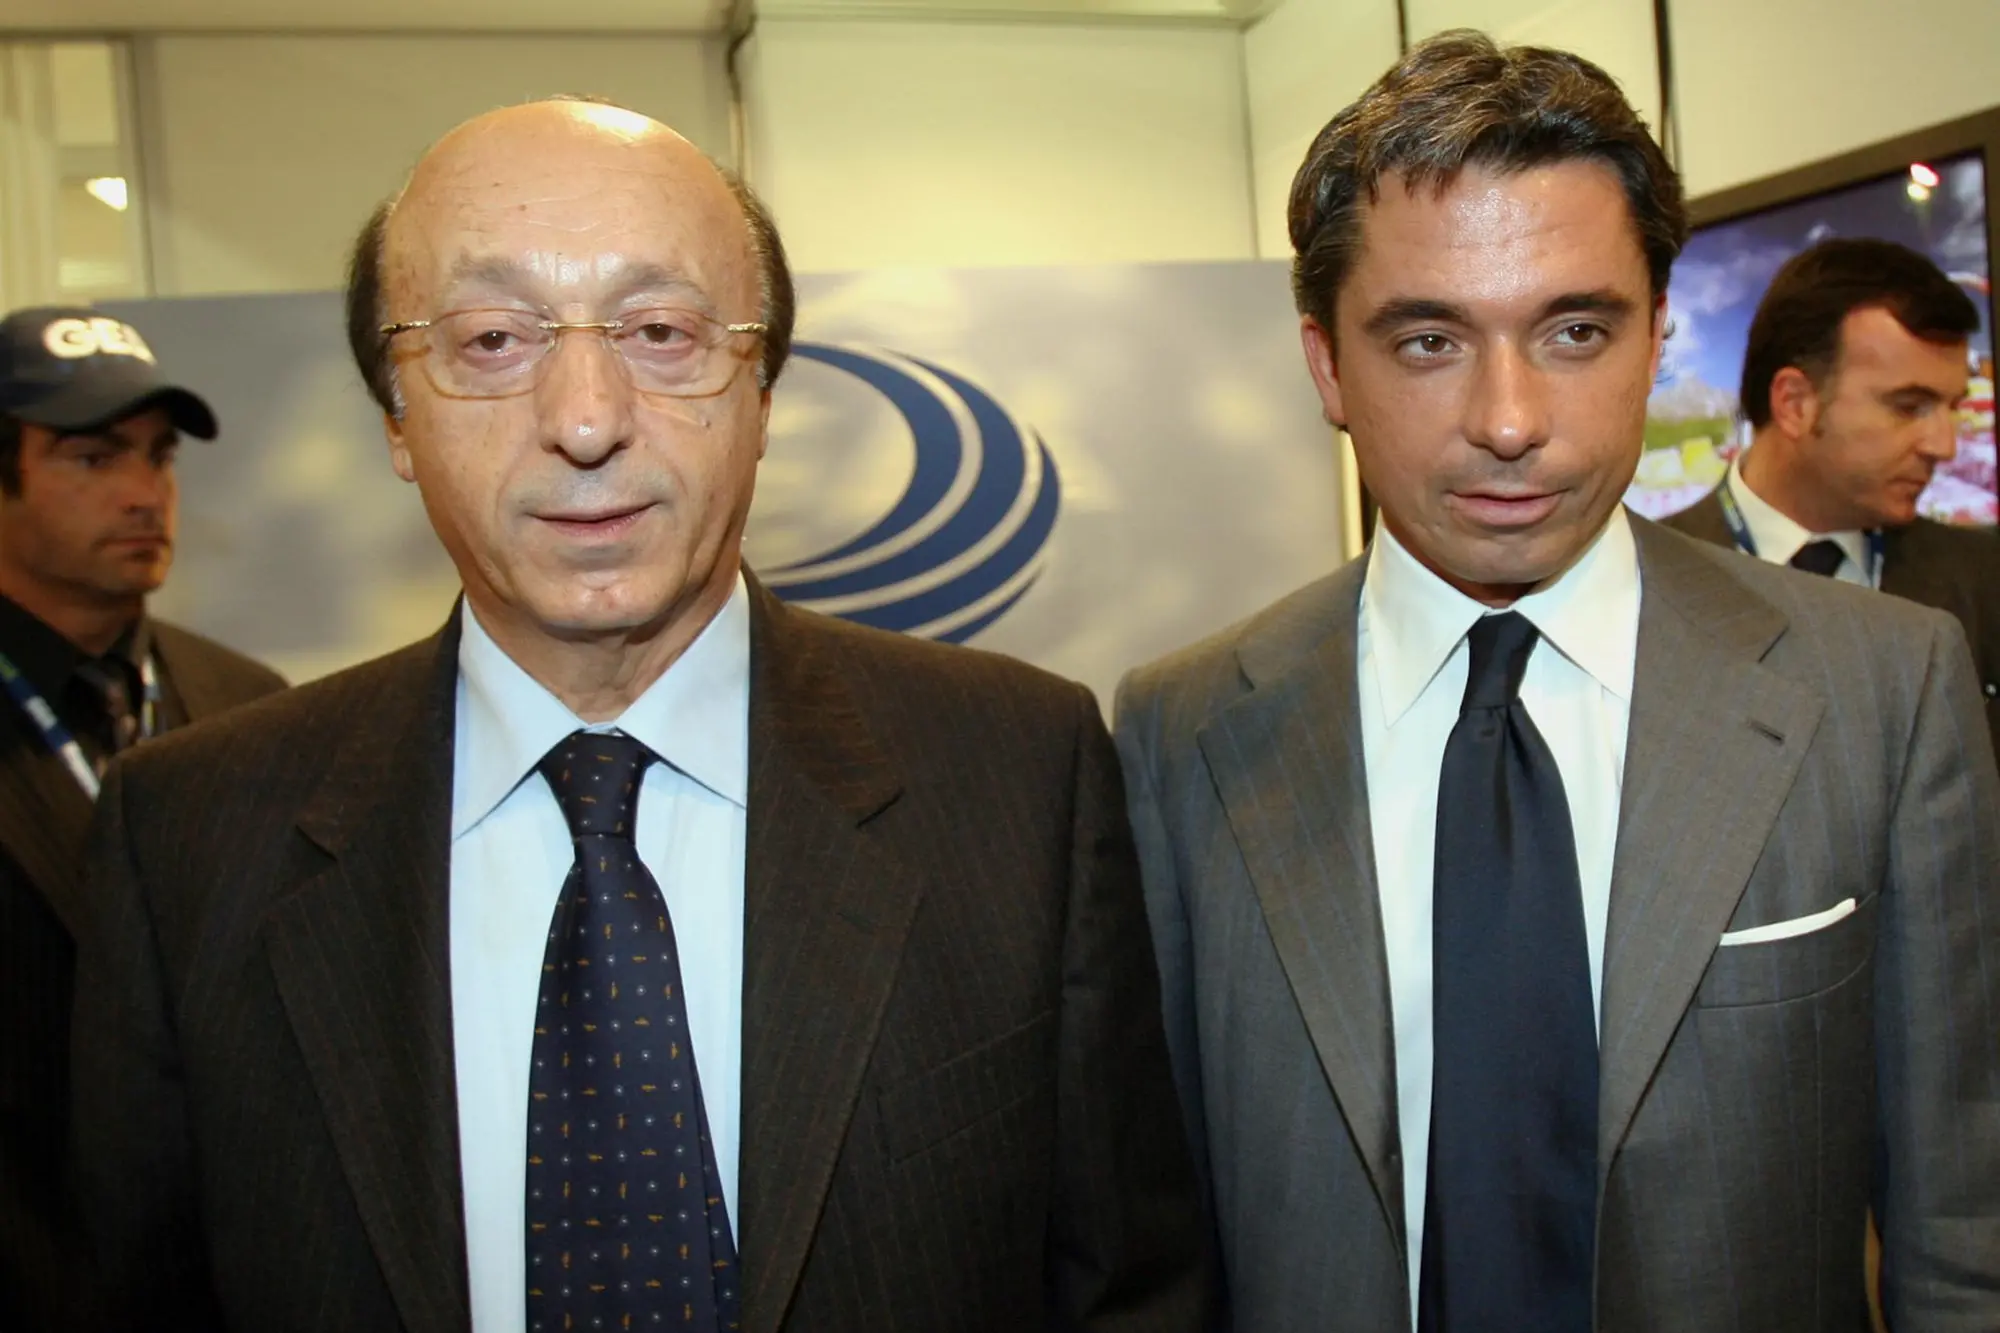 ** FILE ** Luciano, left, and Alessandro Moggi attend the 'Expogoal' soccer fair in Milan, Italy, in this Monday, Nov.14, 2005 file photo. Italian media are publishing wiretaps from past and closed Italian prosecutors' investigations on sports fraud, of phone conversations between soccer officials with references to referee designation for soccer matches. (AP Photo/Luca Bruno)